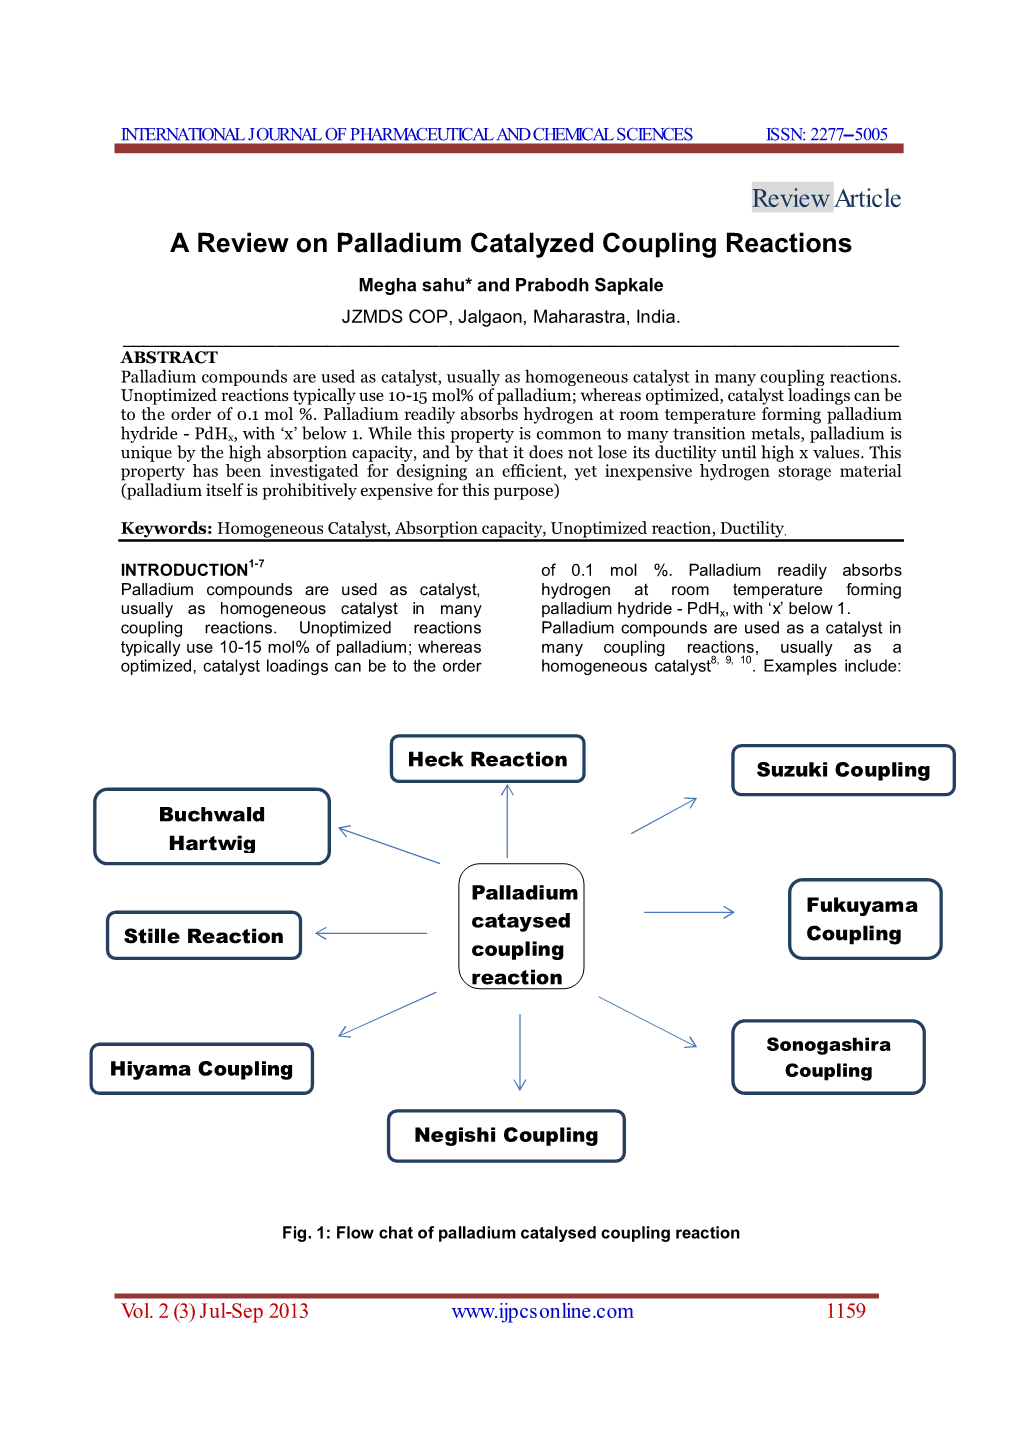 A Review on Palladium Catalyzed Coupling Reactions